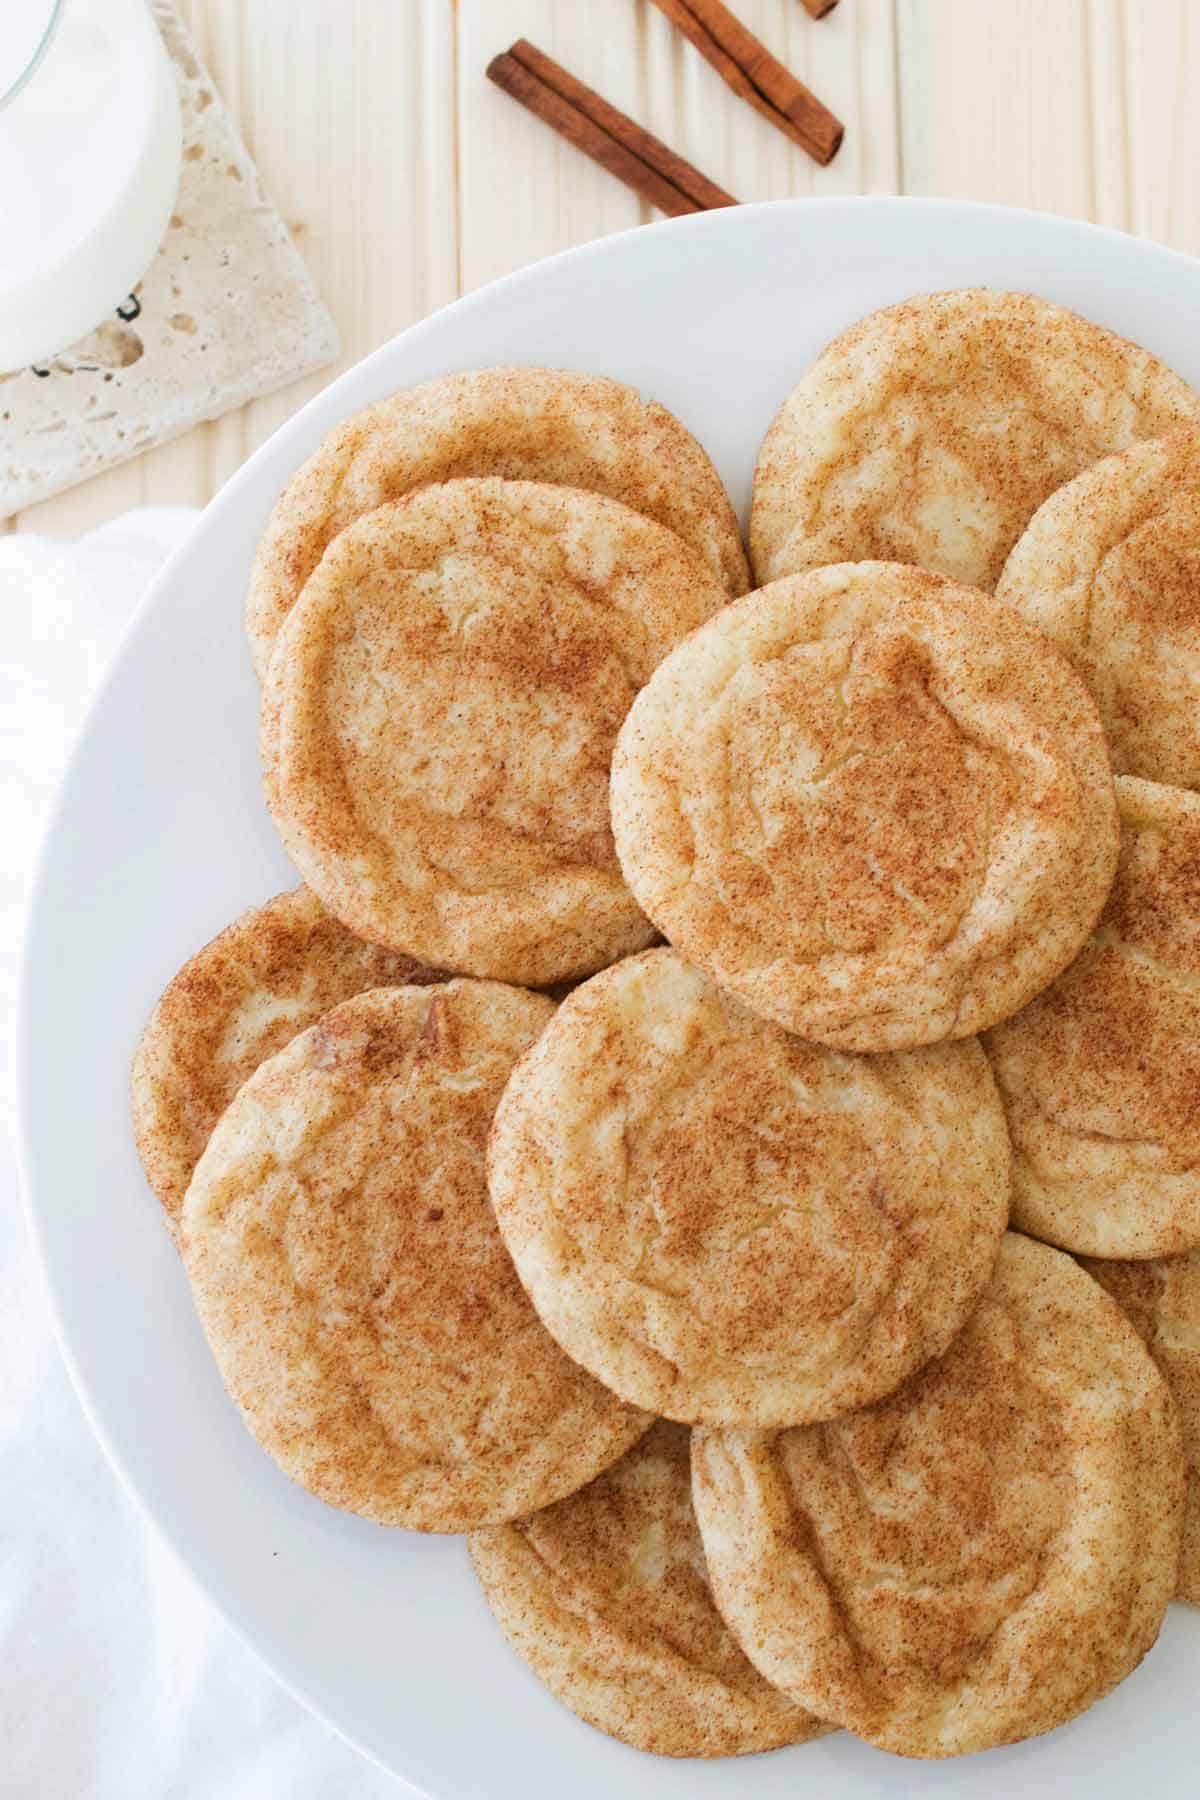 Plate of snickerdoodles.